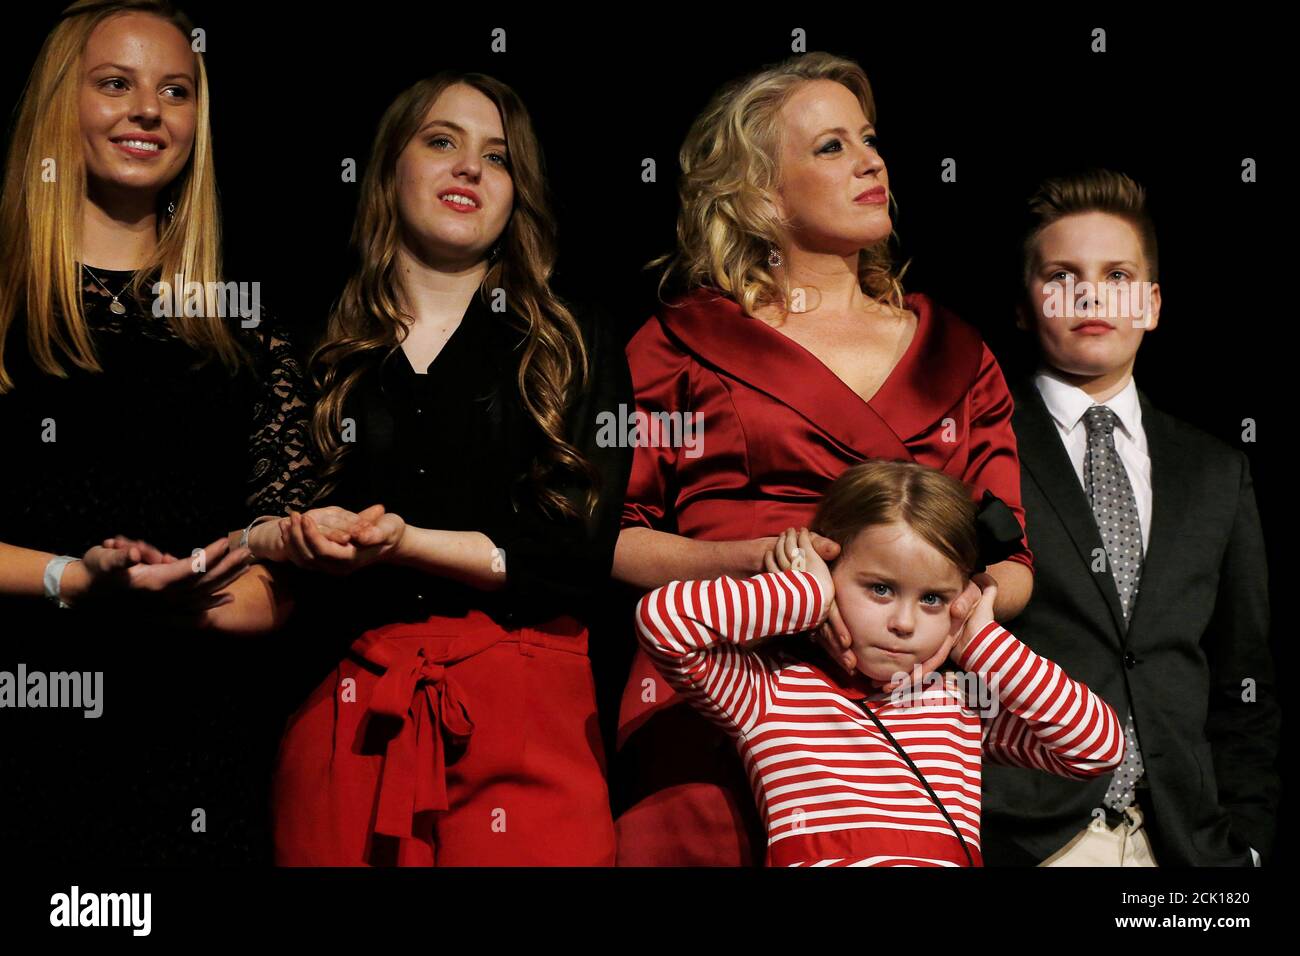 I særdeleshed udslæt Råd Australian Labor Party opposition leader Bill Shorten's wife Chloe (2nd R)  places her hands over their daughter Clementine's ears during cheers from  the crowd during an election night party in Melbourne, July